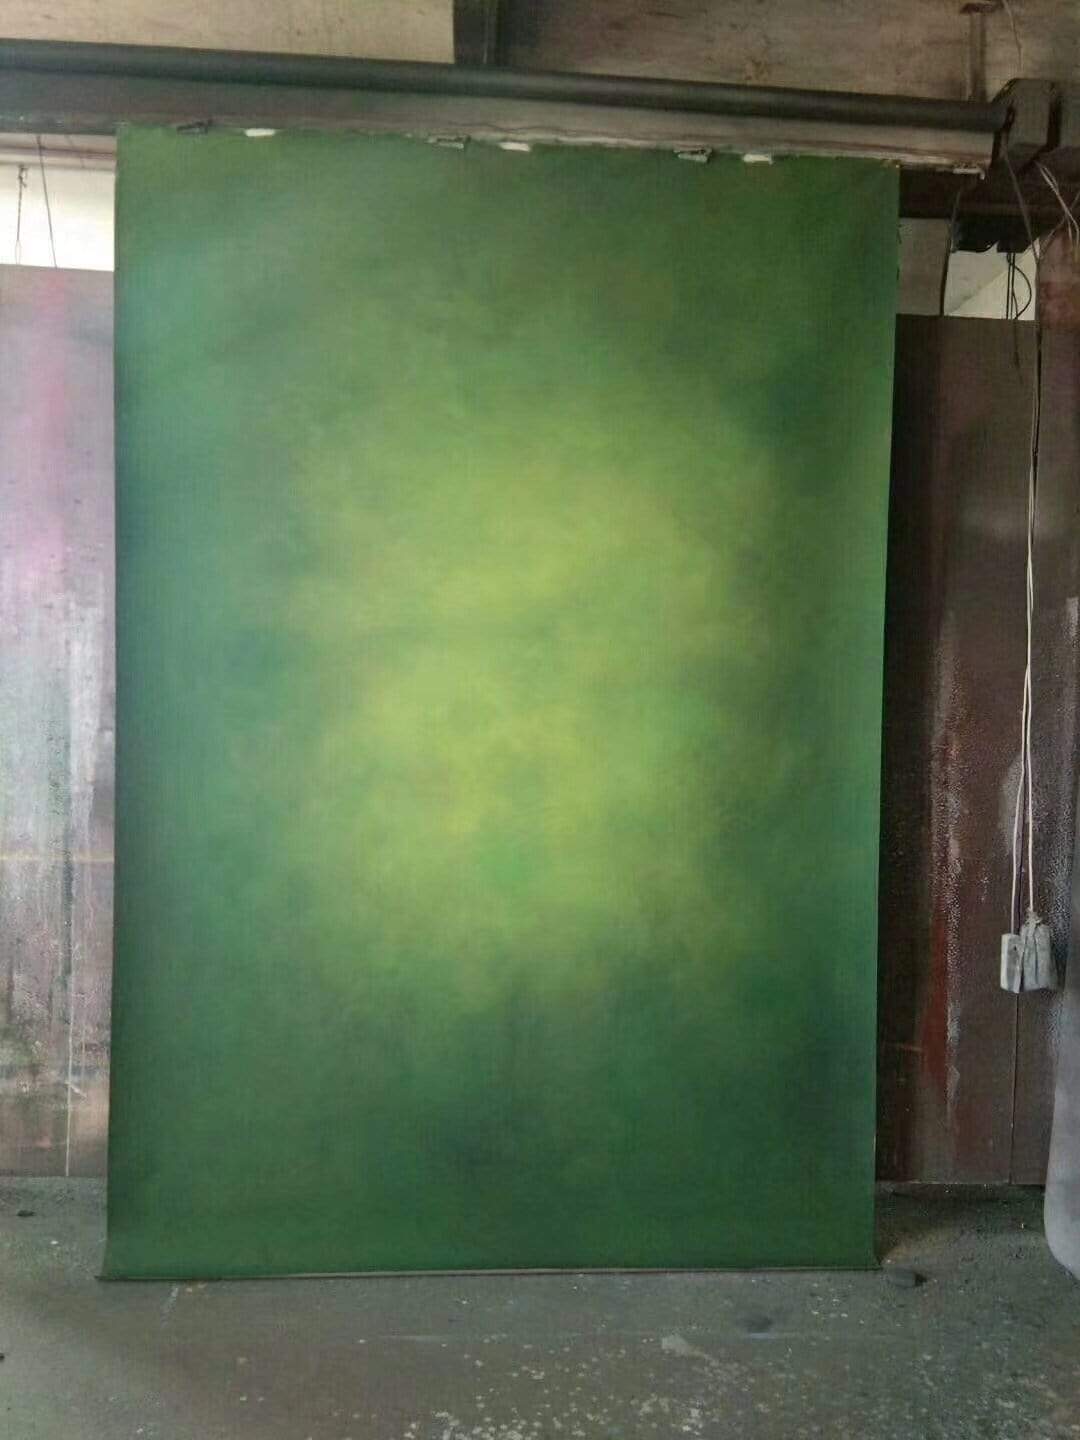 Kate Foggy Green Abstract Gradient Texture Spray Painted Backdrop